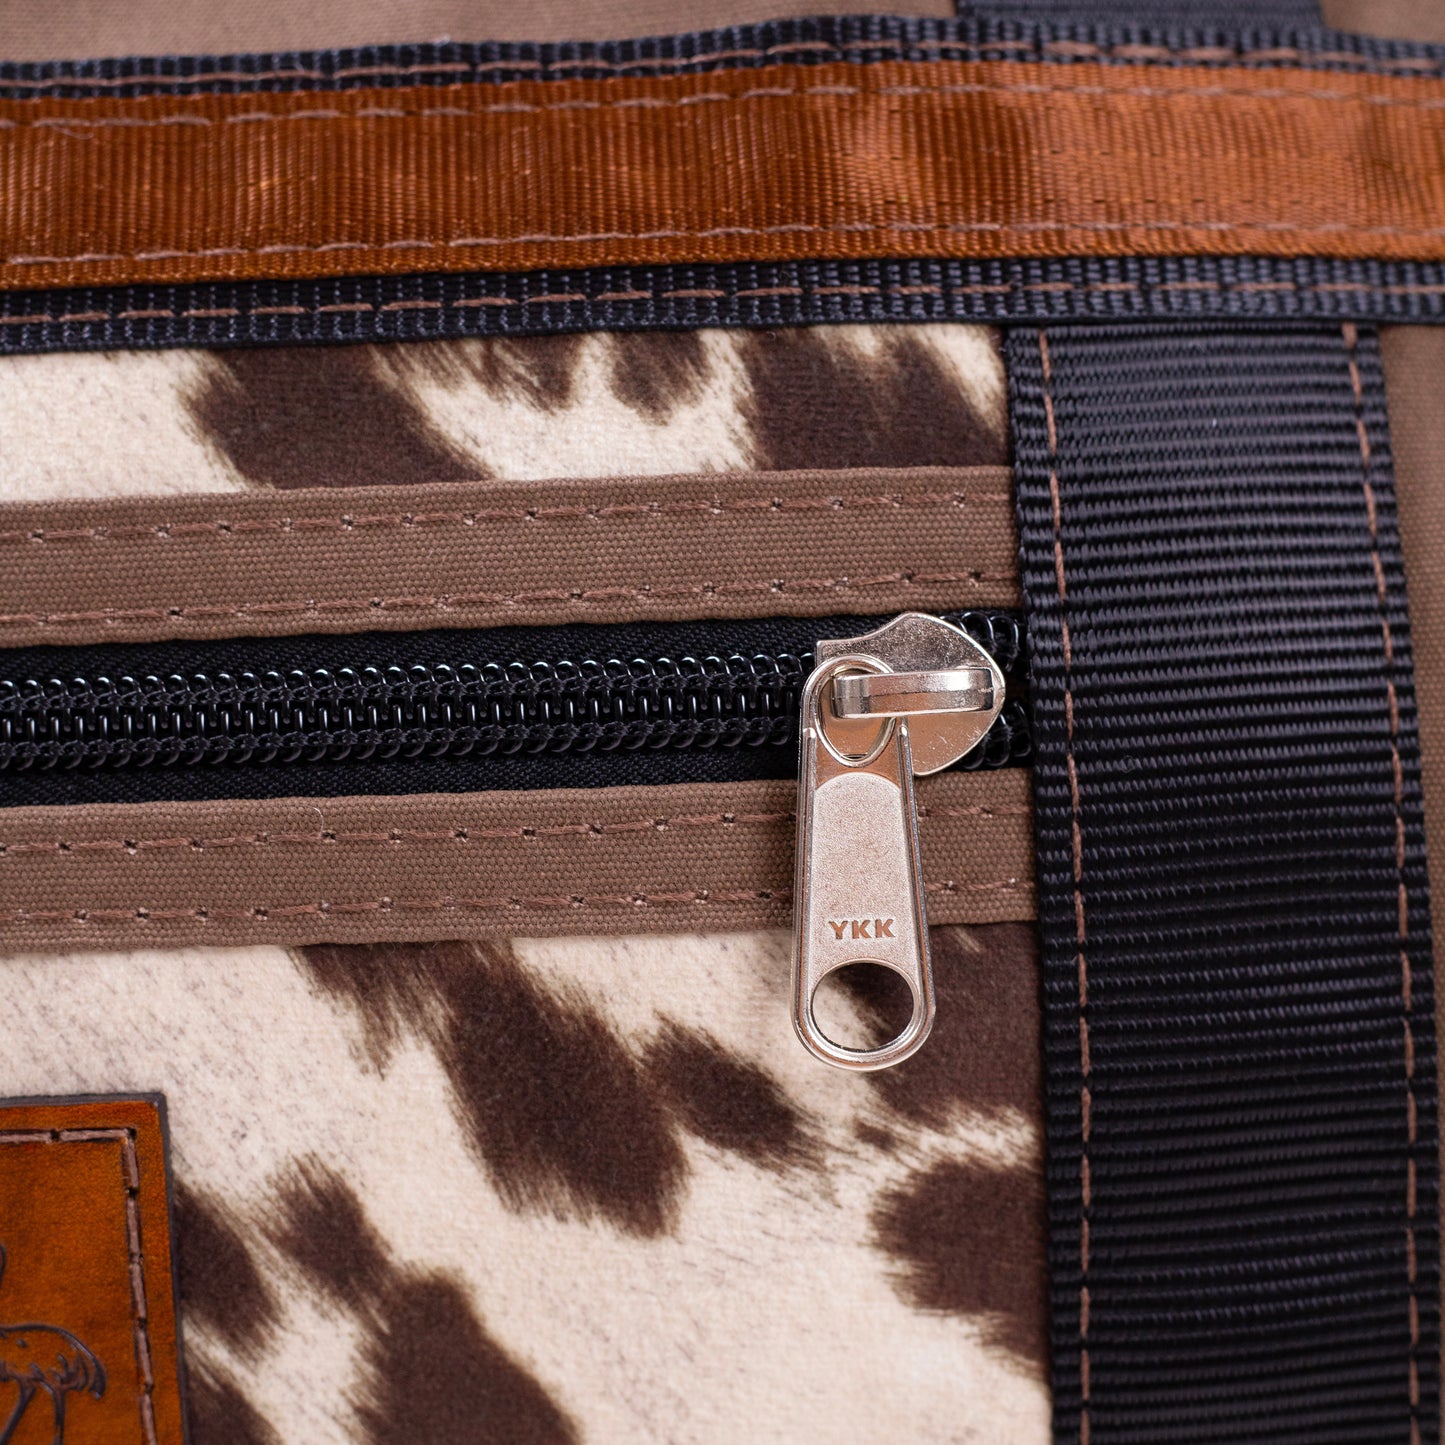 Antelope Brown Travel Canvas Bag with limited edition cow print fabric.